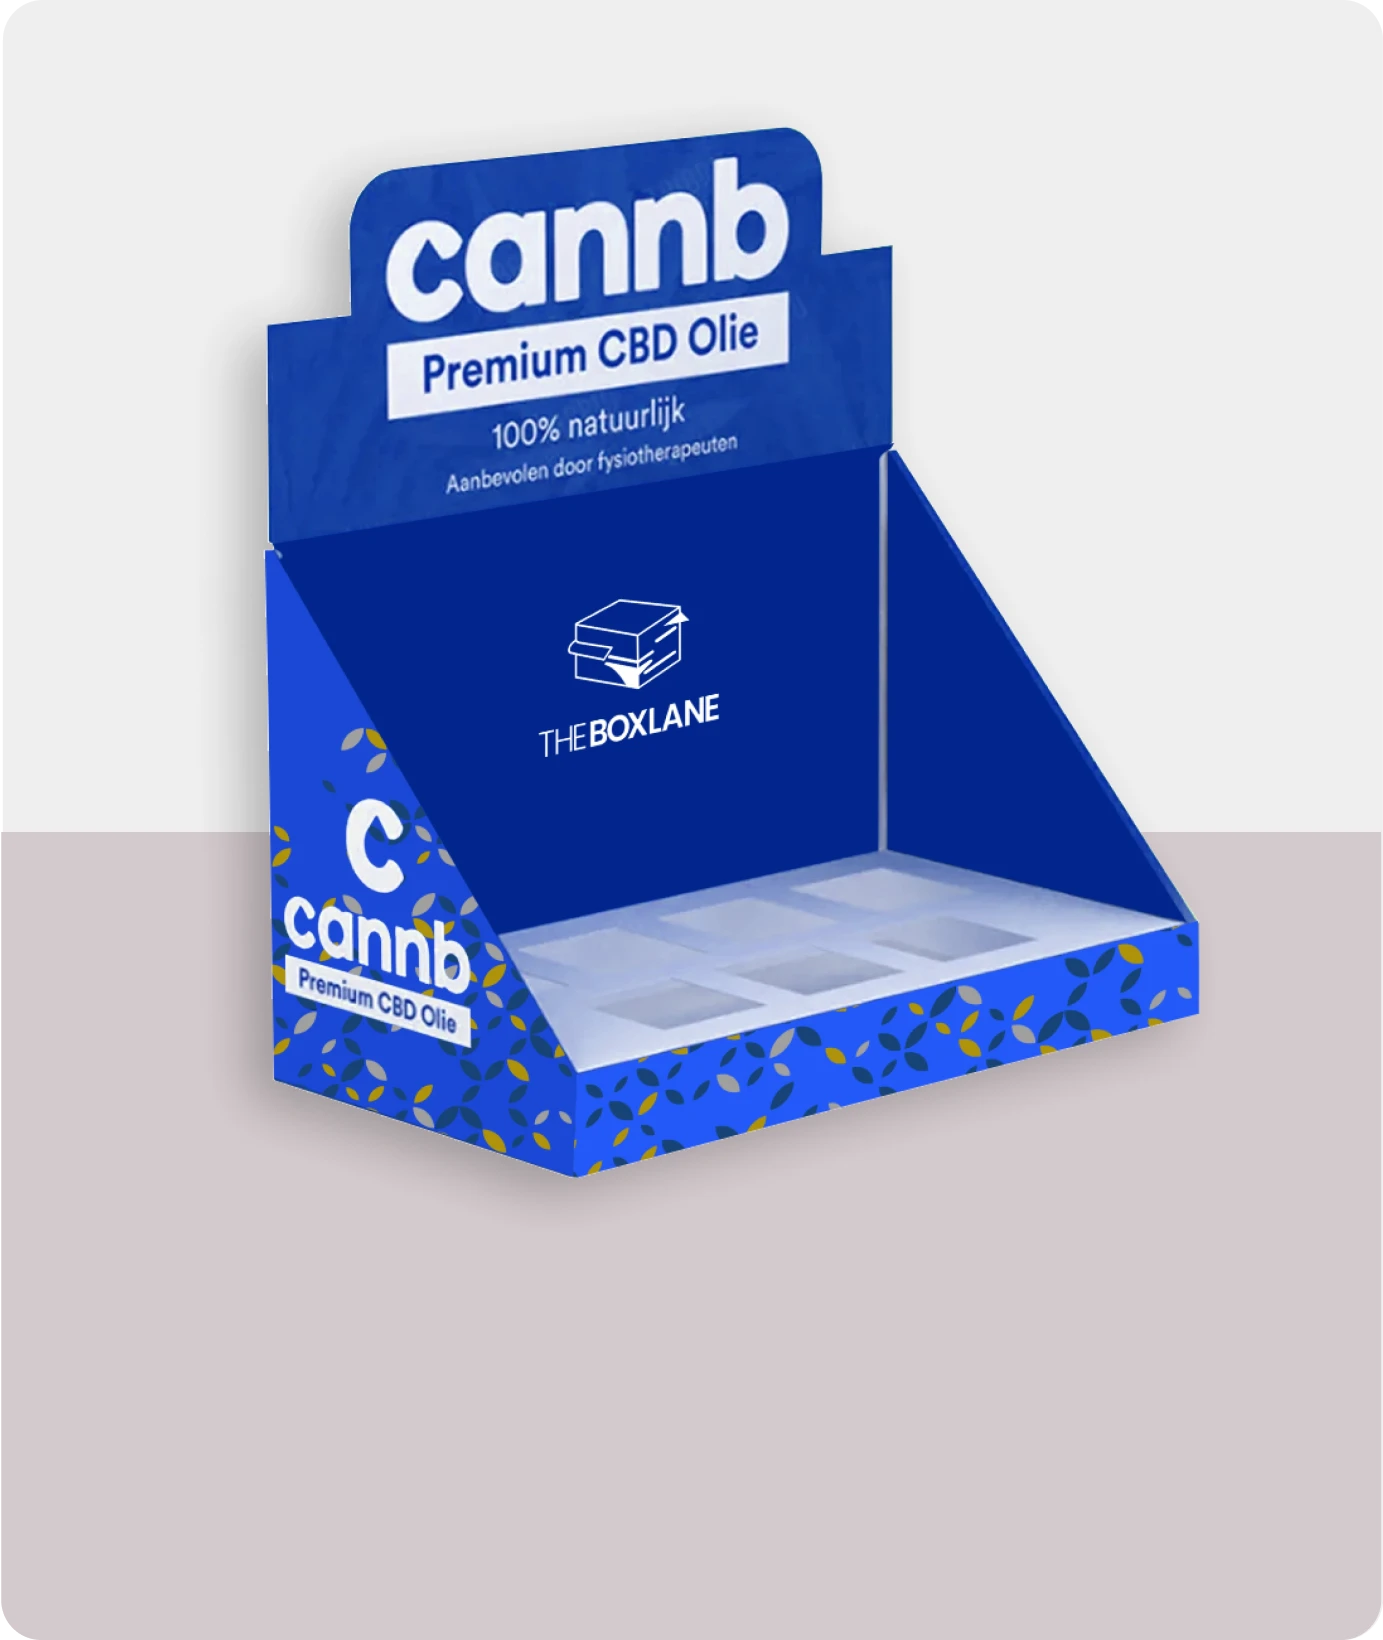 CBD Display Boxes related products | The Box Lane